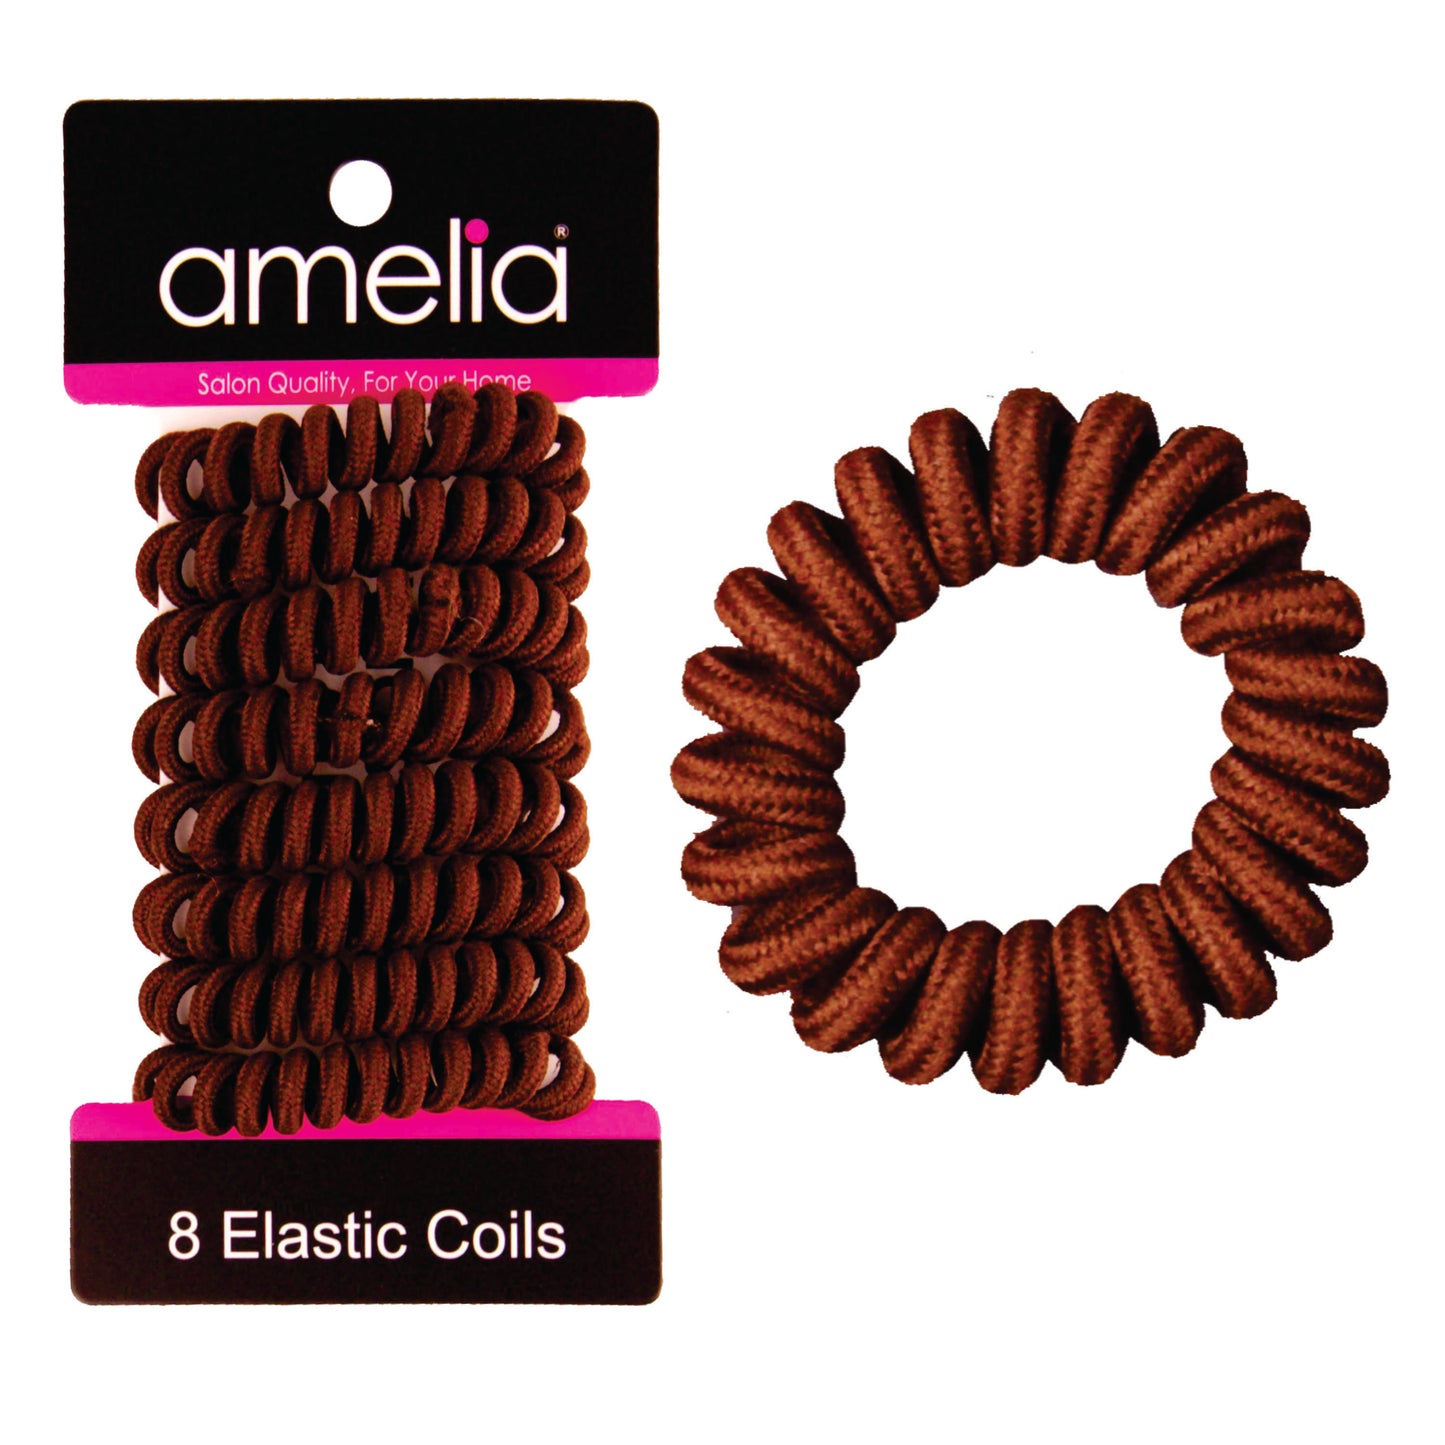 Amelia Beauty, 8 Small Fabric Wrapped Elastic Hair Coils, 1.75in Diameter Spiral Hair Ties, Gentle on Hair, Strong Hold and Minimizes Dents and Creases, Brown